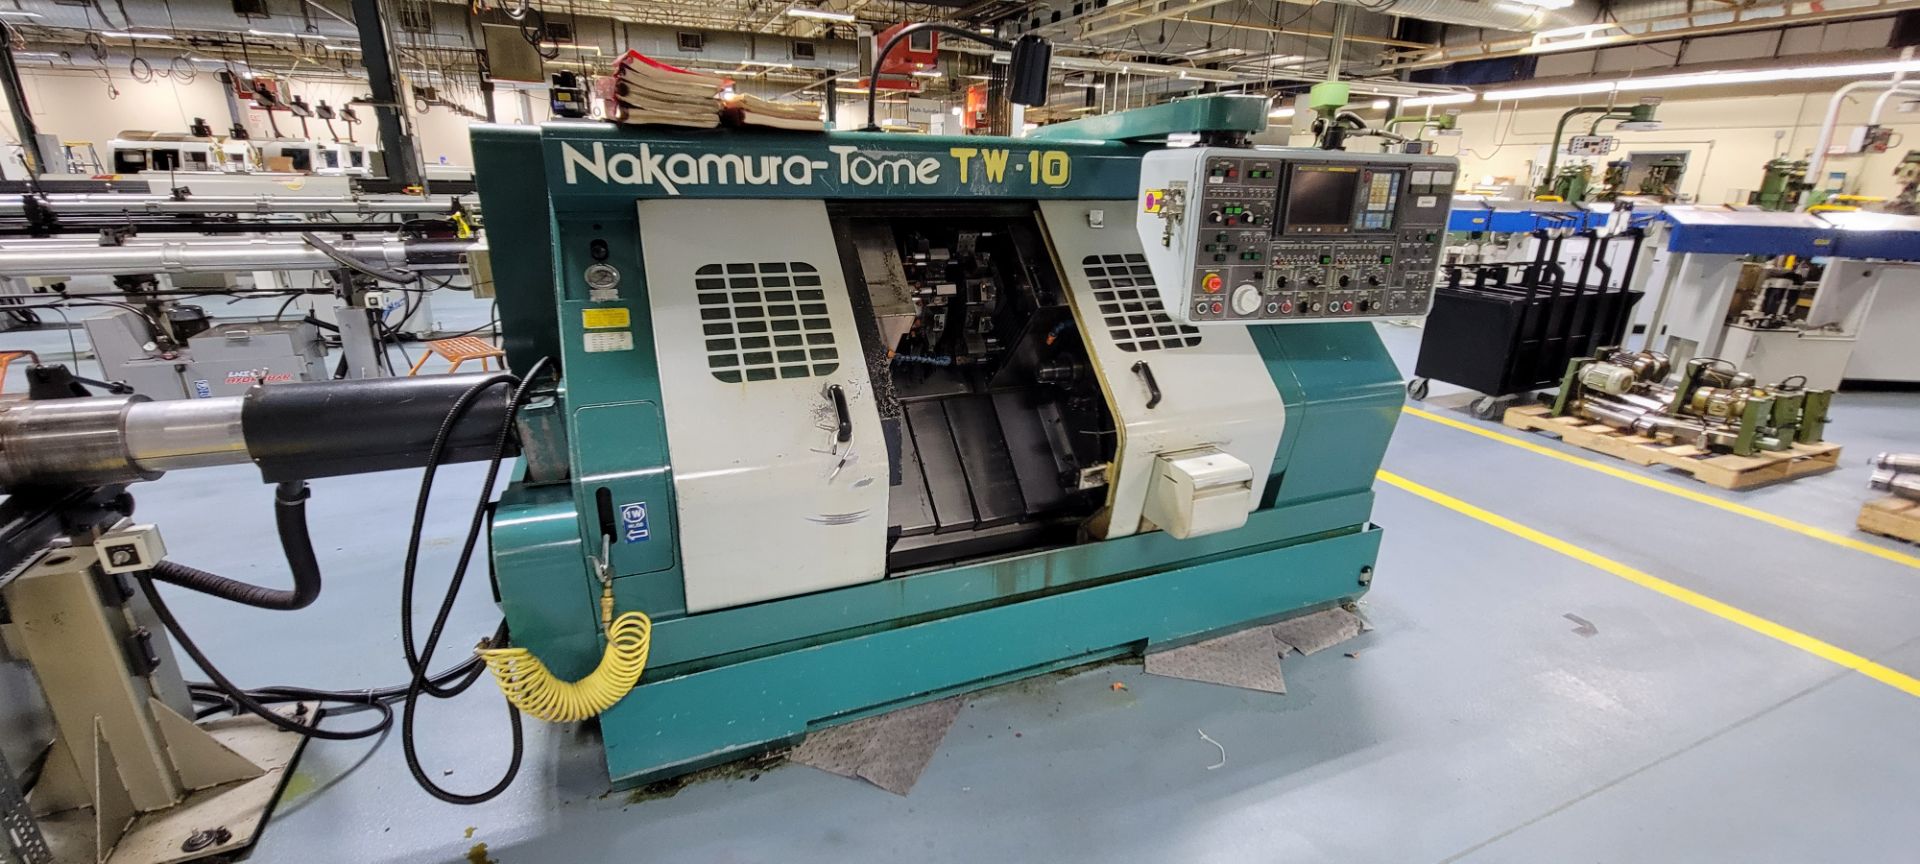 Nakamura Tome TW-10MM 6-Axis CNC Turning Center - Image 3 of 17